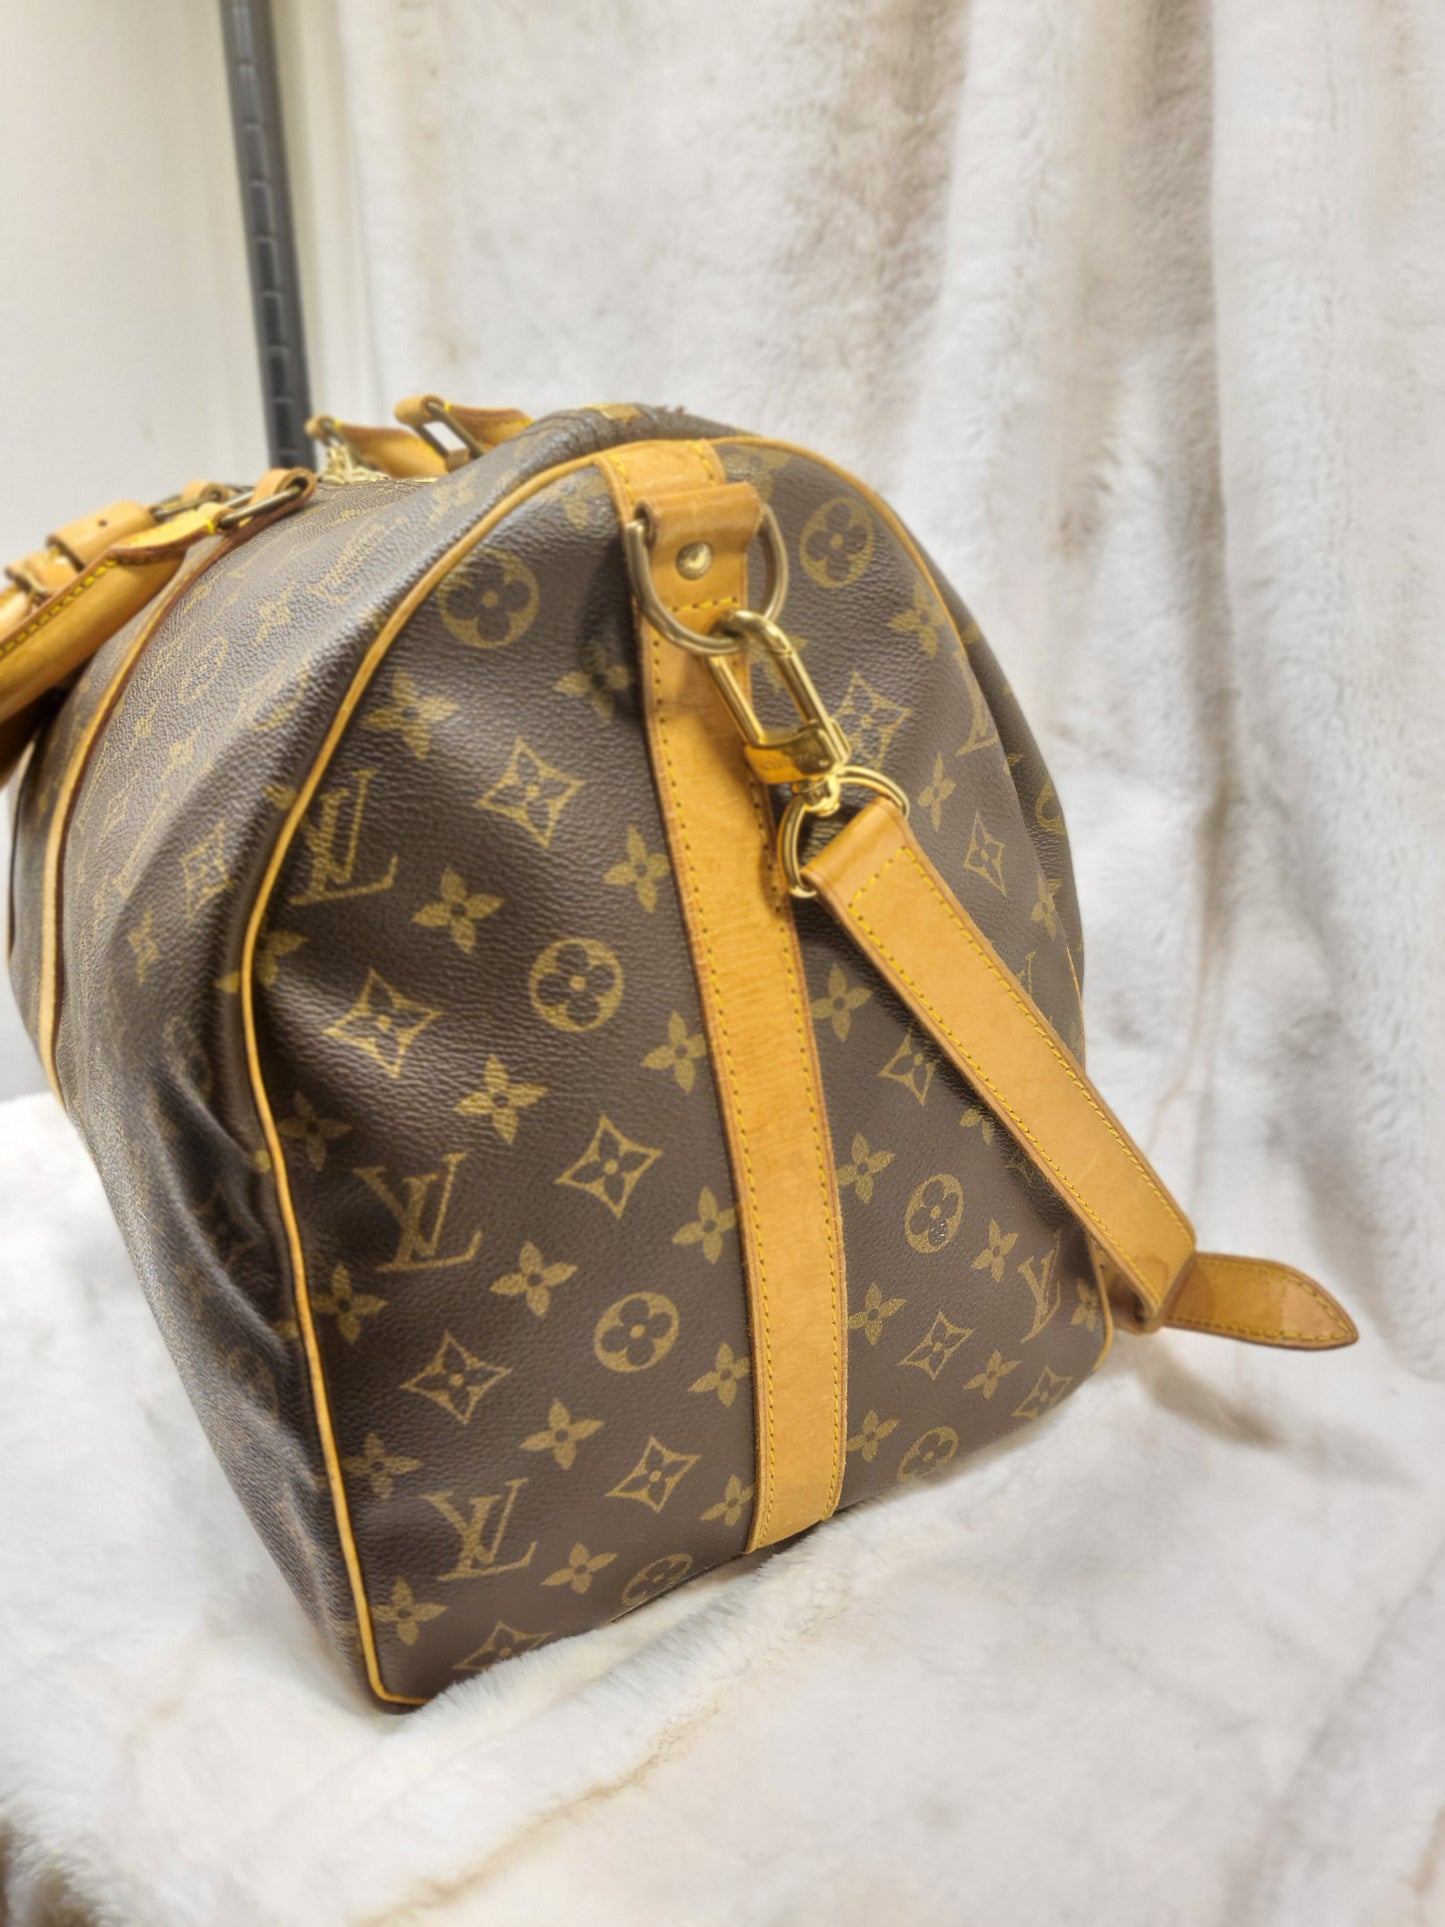 Authentic pre-owned Louis Vuitton Keepall 50 bandoliere travel duffel bag